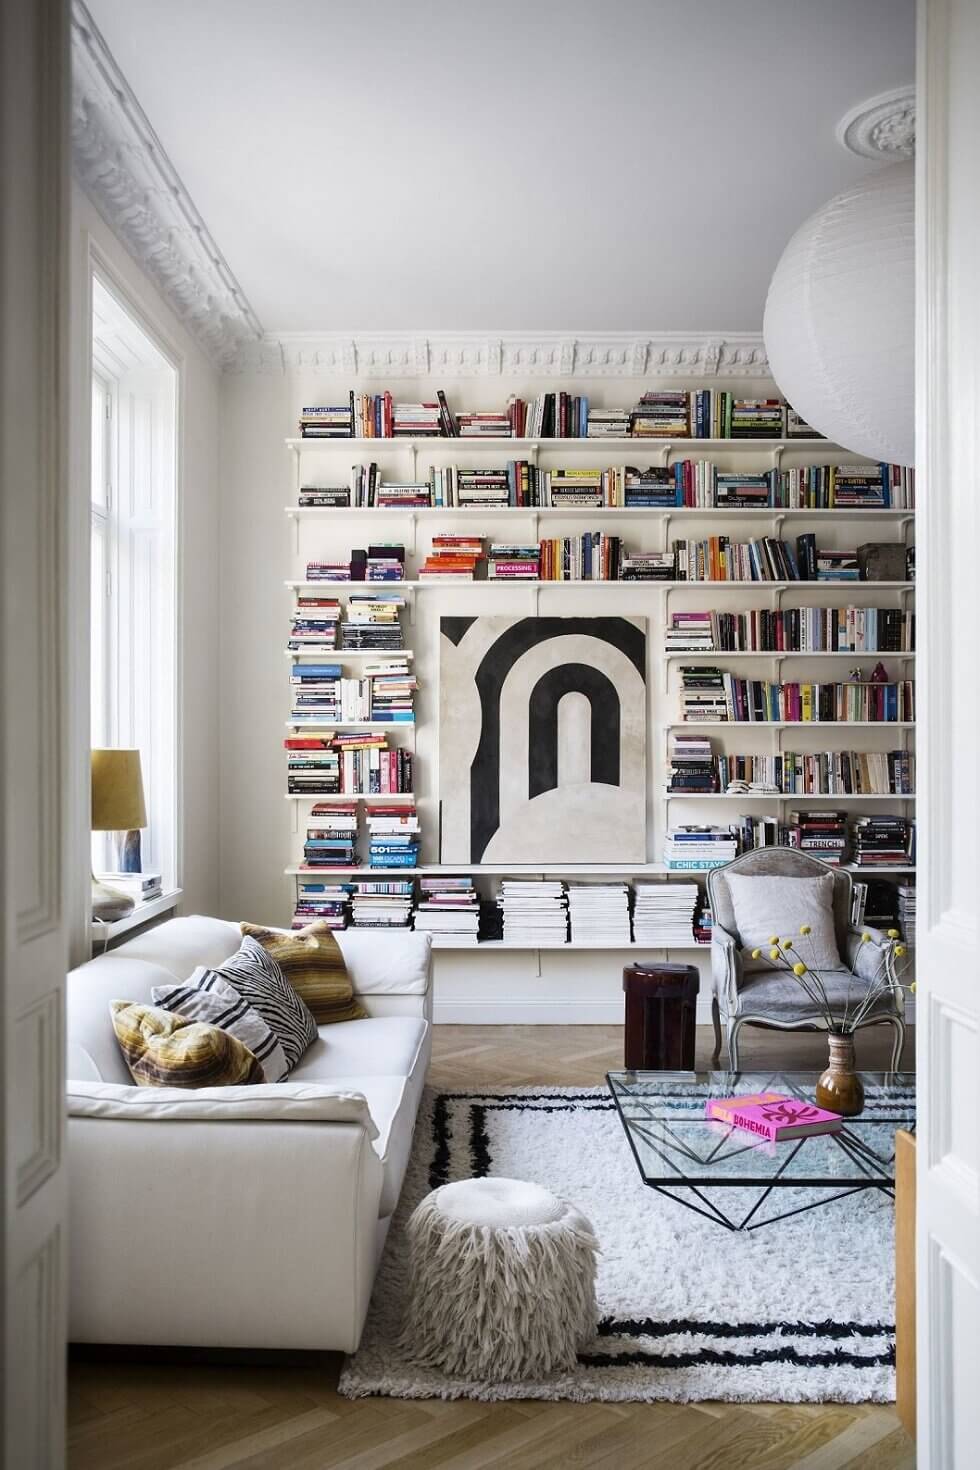 living-room-bookshelves-eclectic-apartment-nordroom) (1)